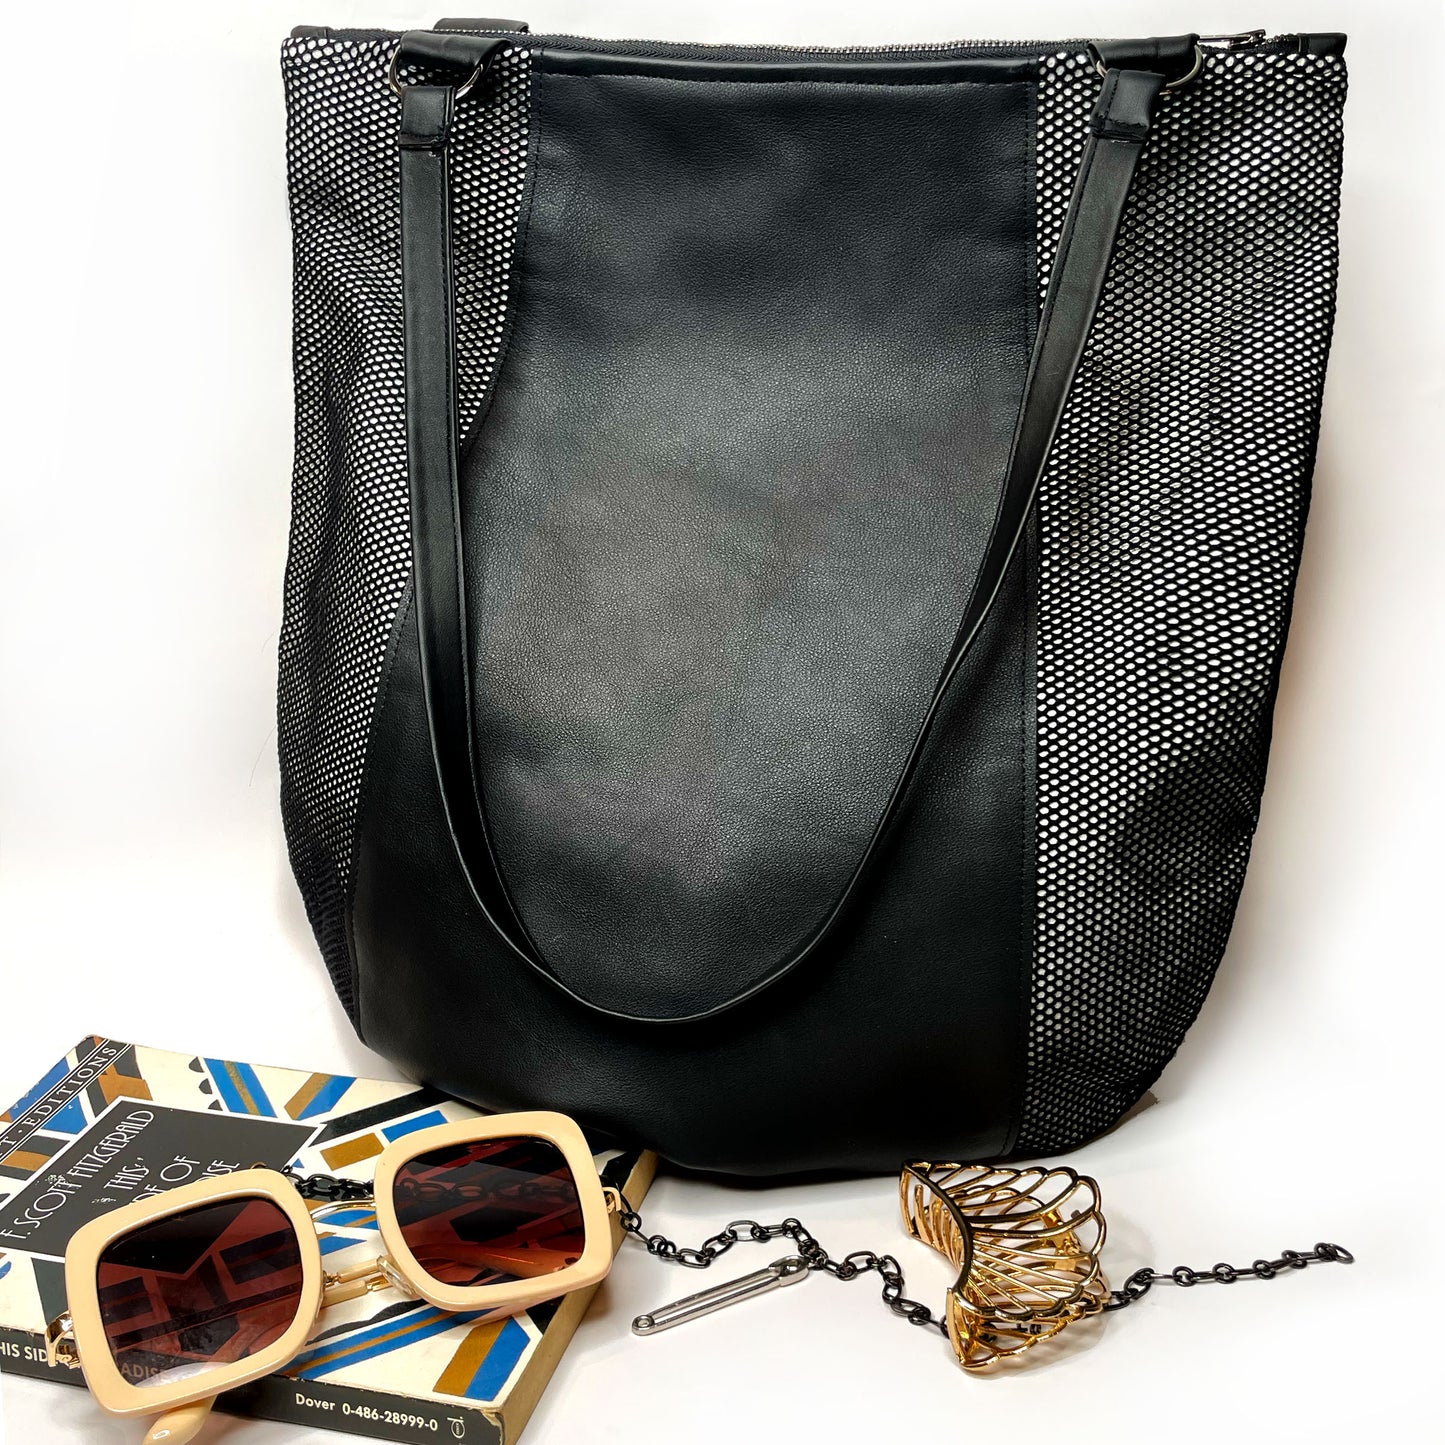 Edgy Leather bag,  black shoulder bag handmade with genuine leather  and mesh.  Unique designs handmade in Brooklyn, NY.